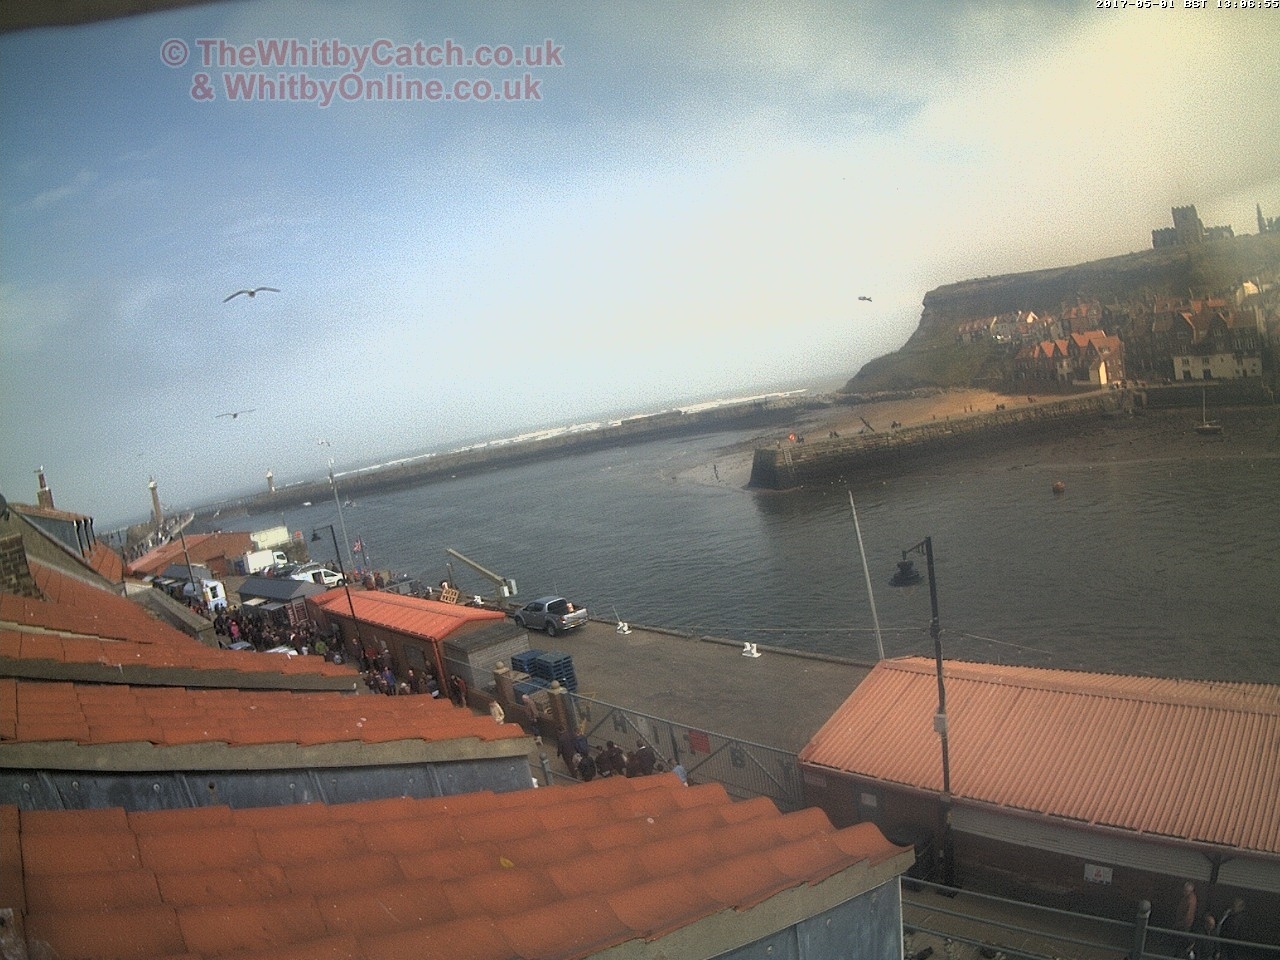 Whitby Mon 1st May 2017 13:07.